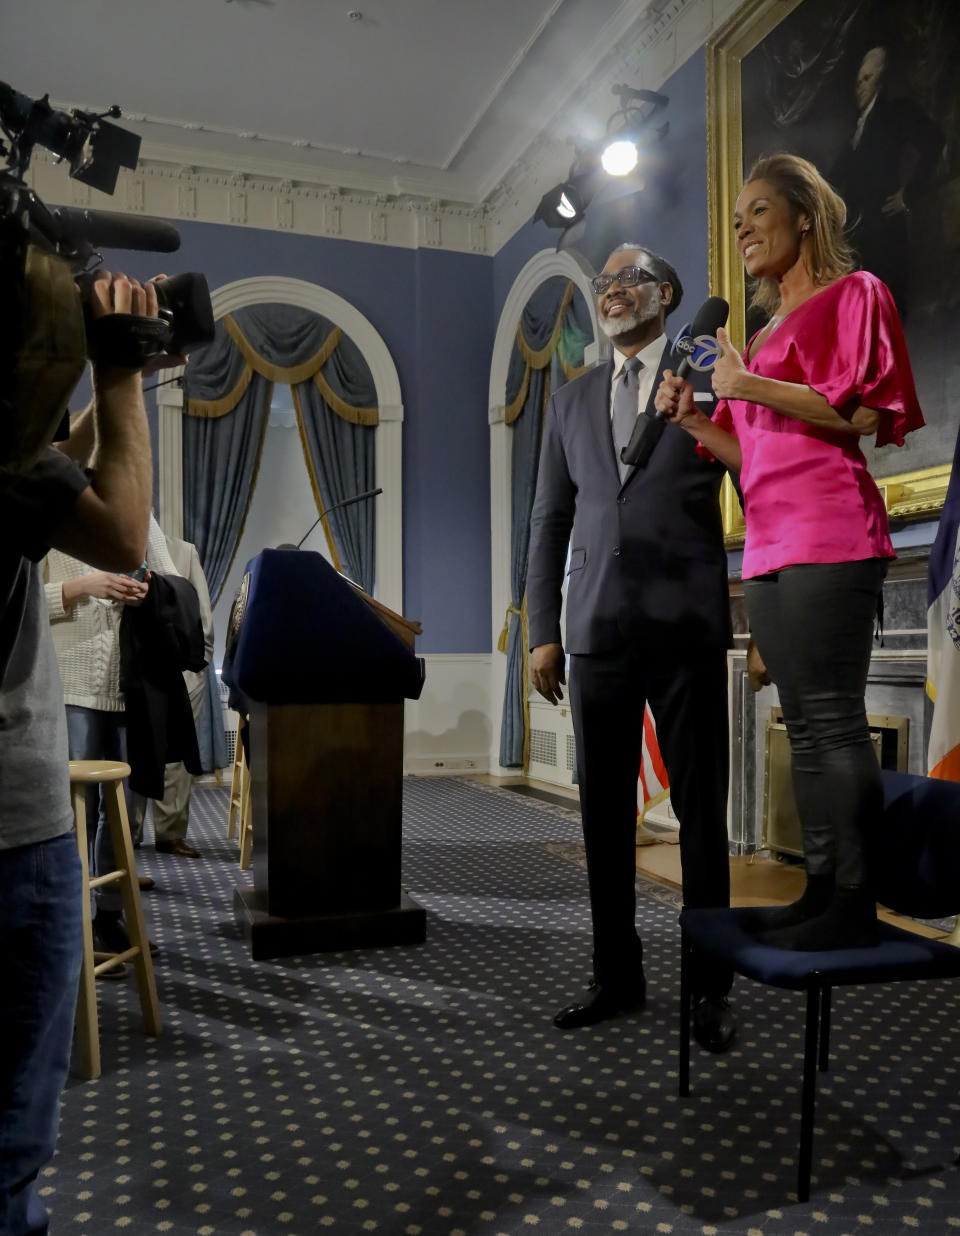 Reporter Kimberly Richardson stands on a chair to interview New York City Councilman Robert Cornegy, Jr., after he was awarded the Guinness World Record's for tallest male politician, Wednesday March 27, 2019, at City Hall in New York. (AP Photo/Bebeto Matthews)